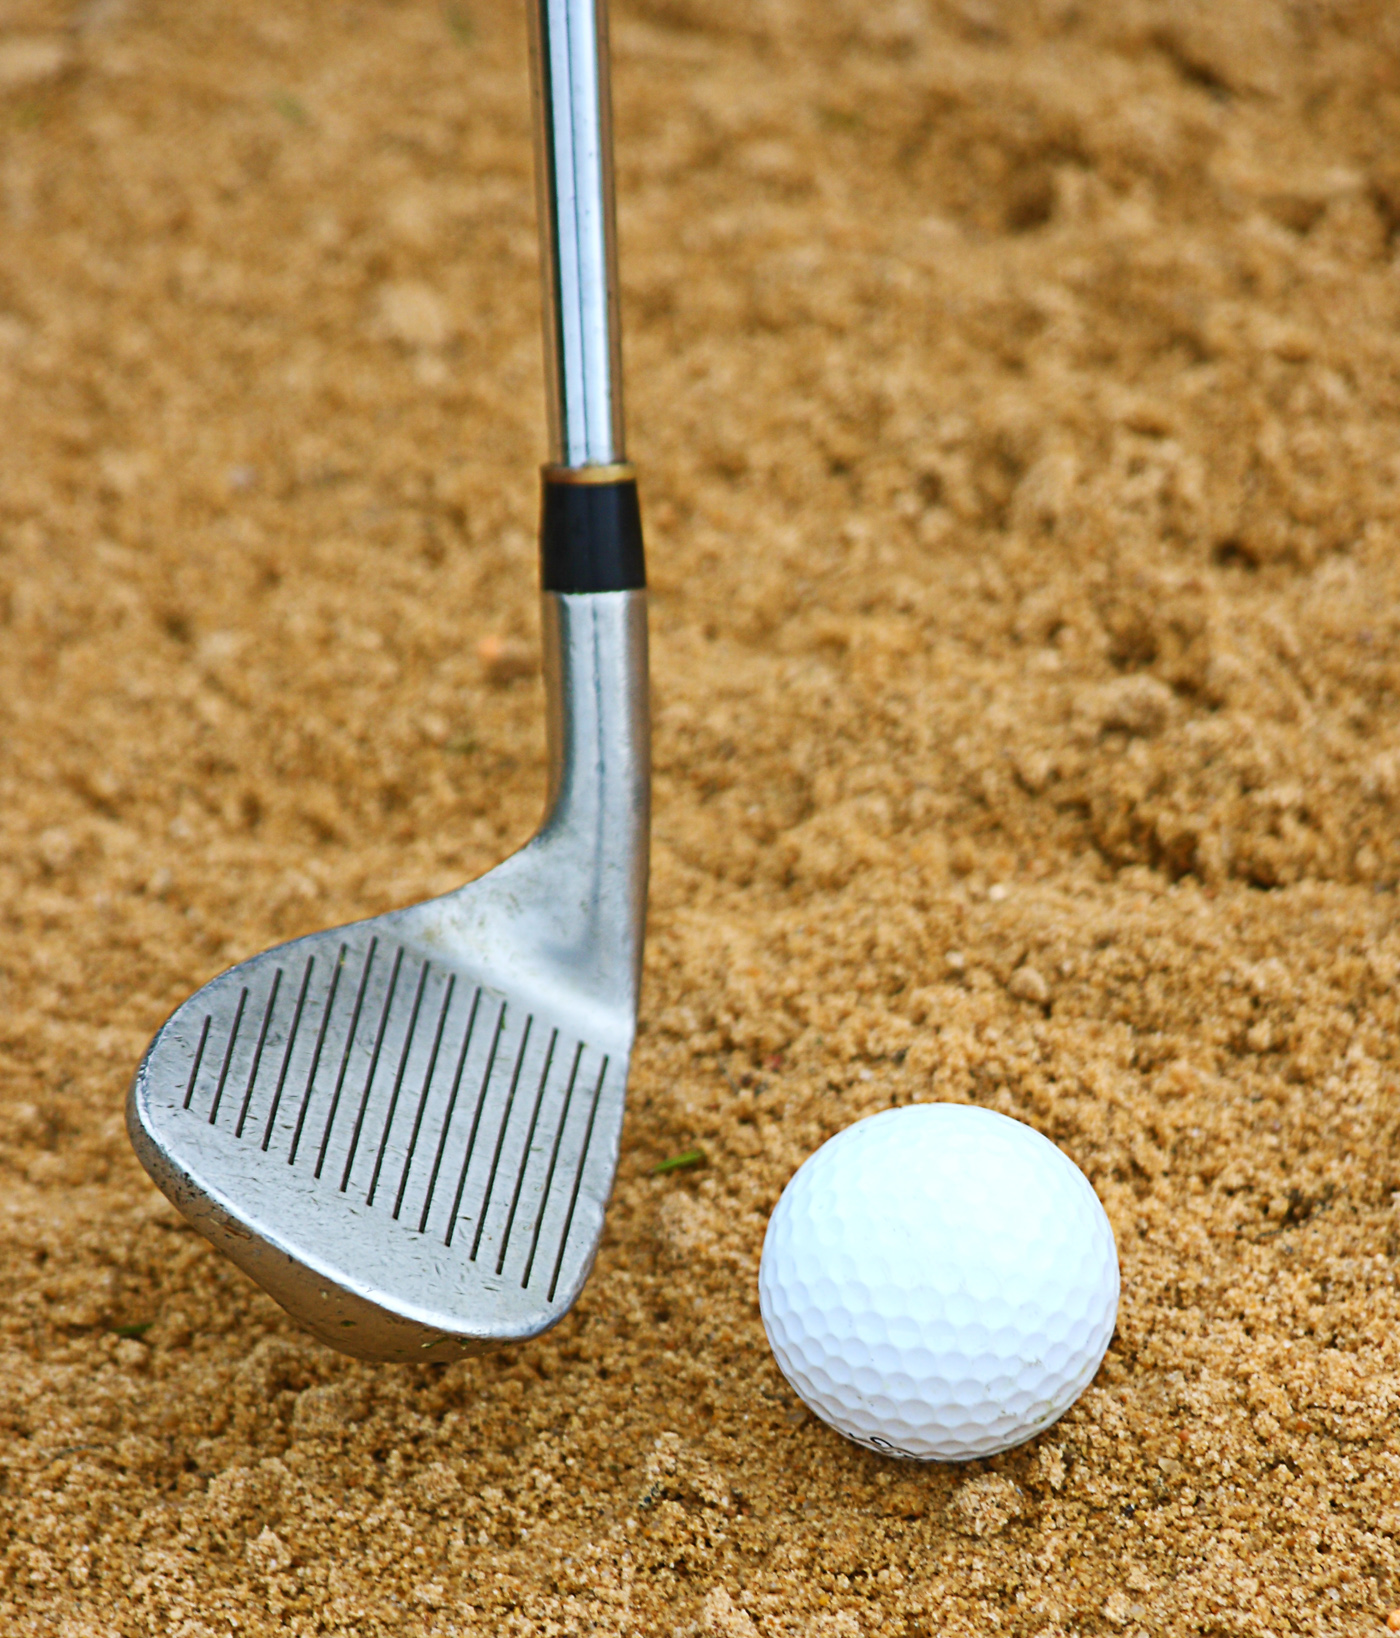 Hitting a golf ball out of a bunker photo